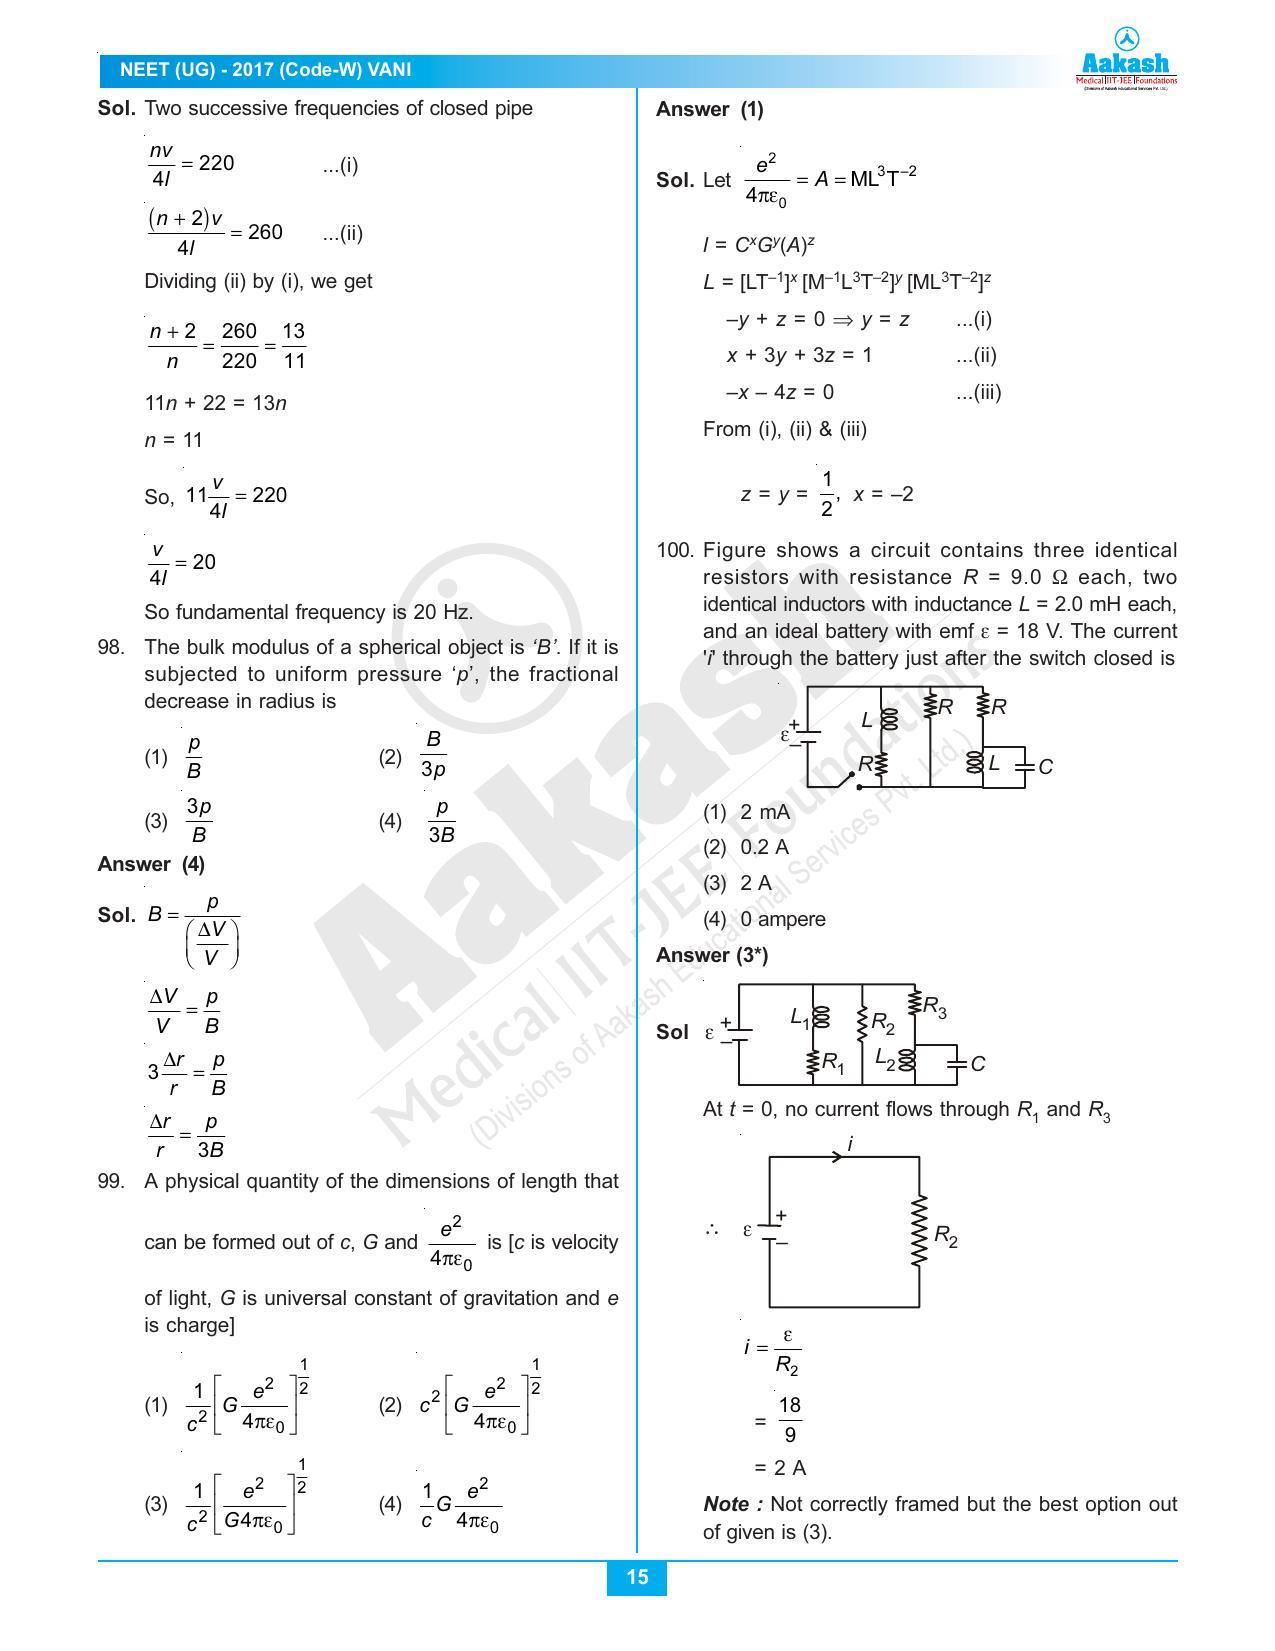  NEET Code W 2017 Answer & Solutions - Page 15